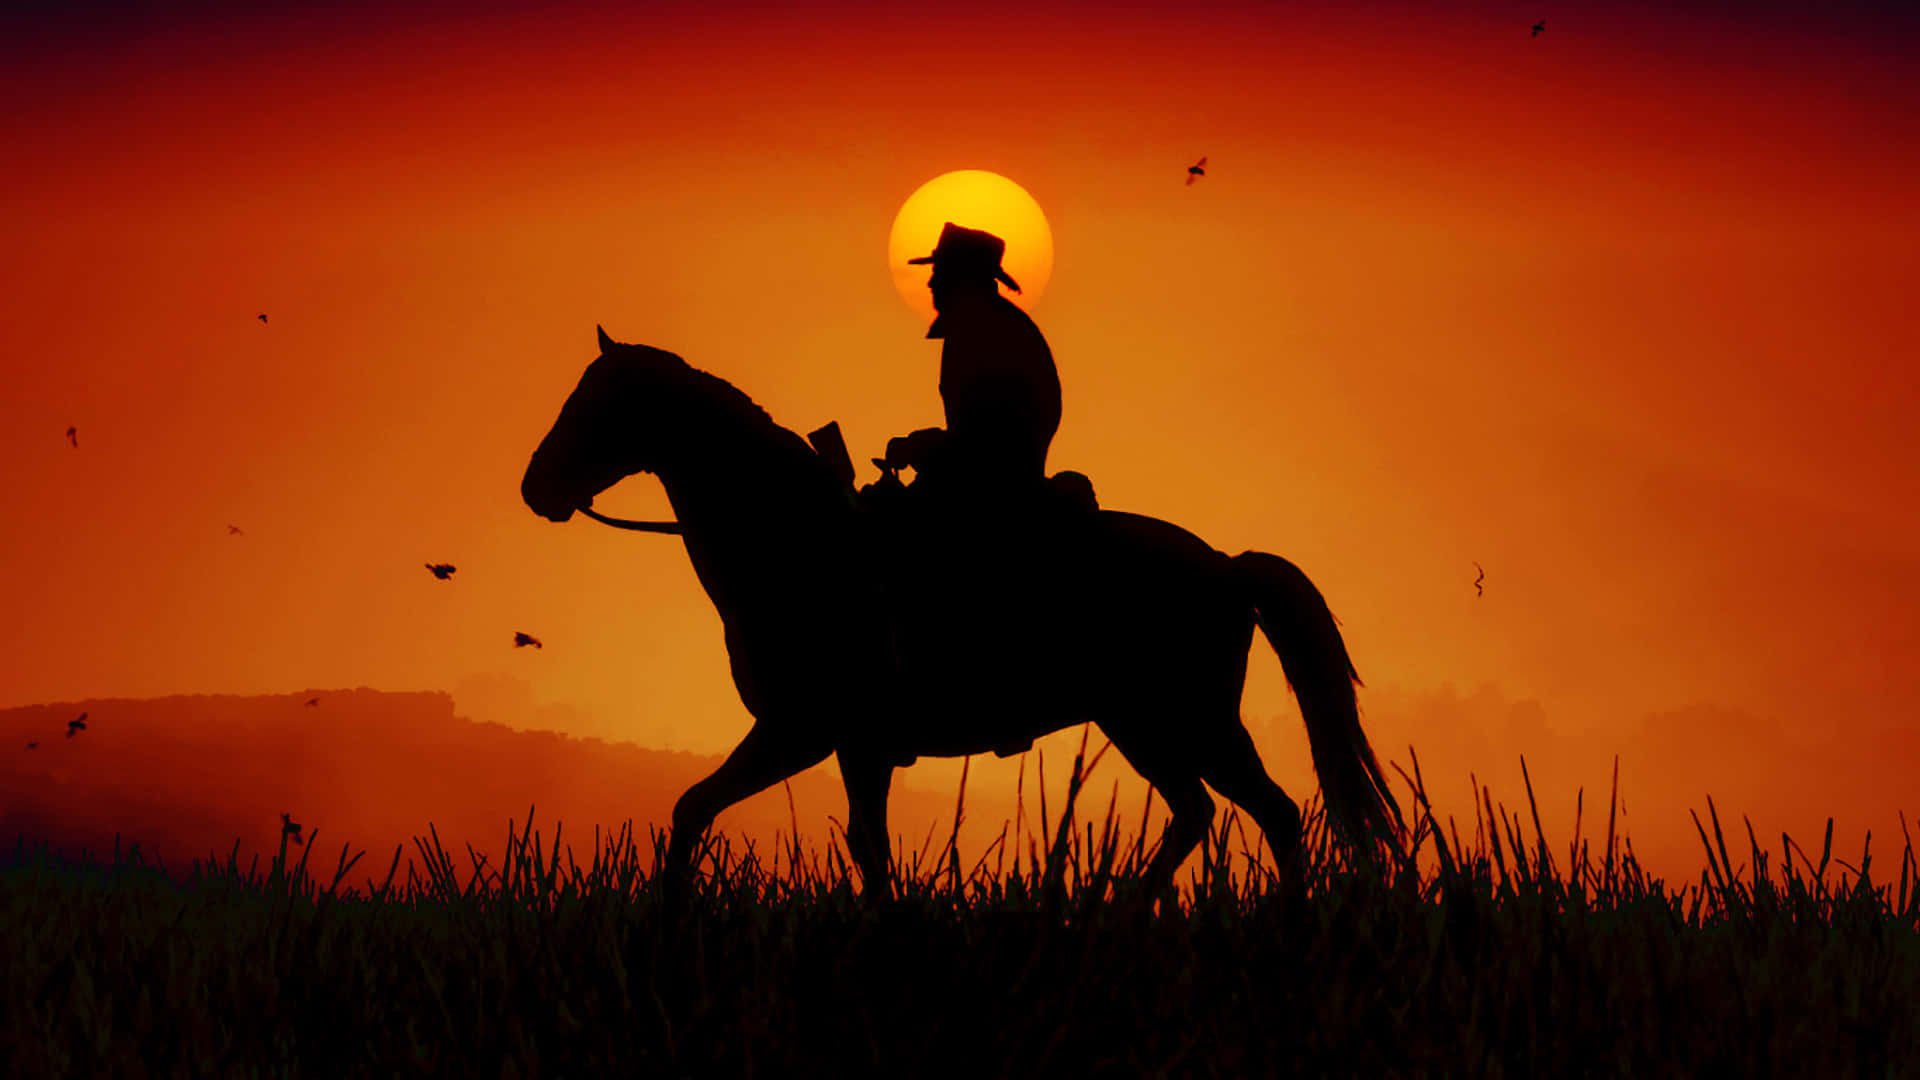 Sheriff Riding A Horse 1920x1080 Red Dead Redemption 2 Background